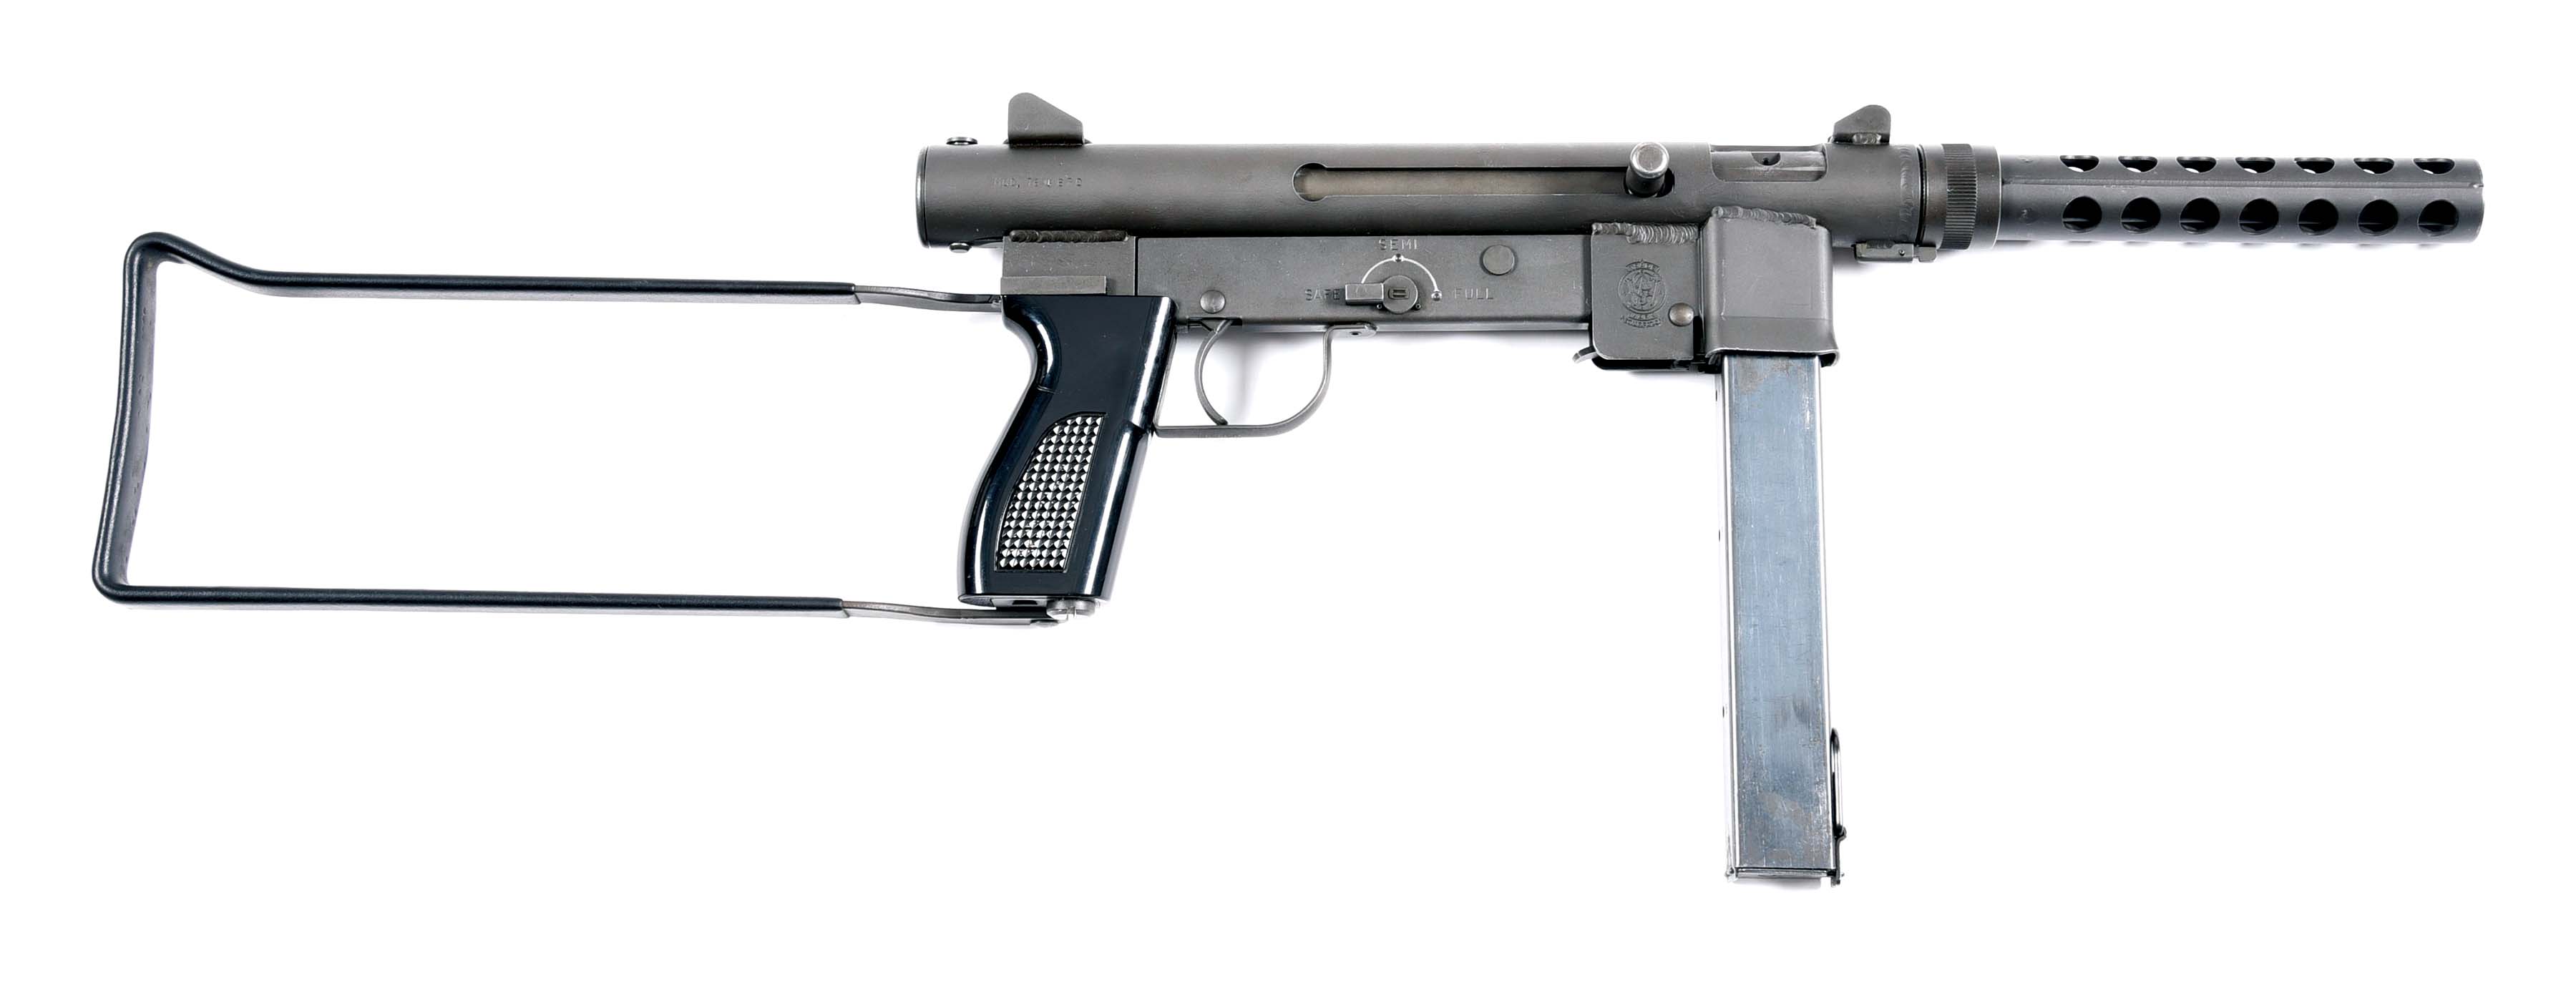 N) smith & wesson model 76 submachine gun (fully transferable). 